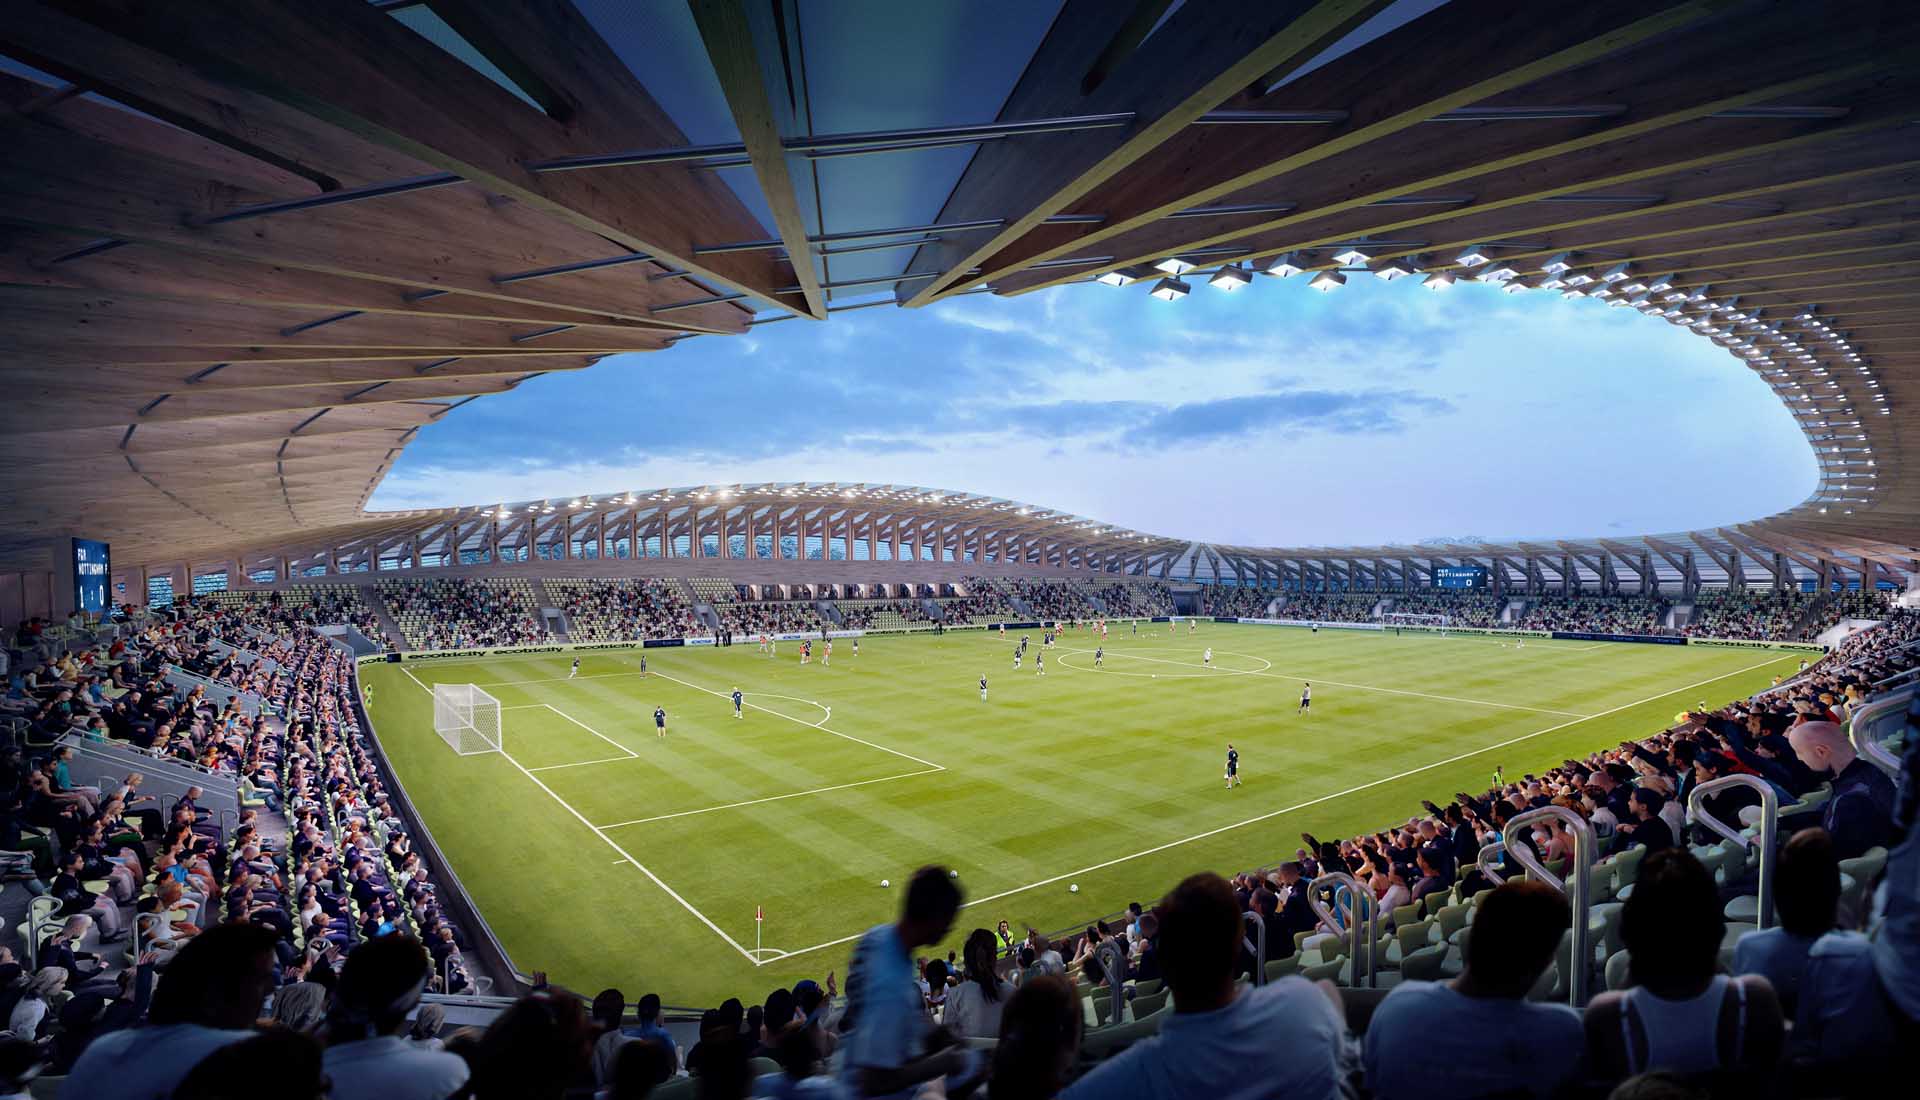 Forest Green Rovers New Wooden Stadium Plans Approved Soccerbible